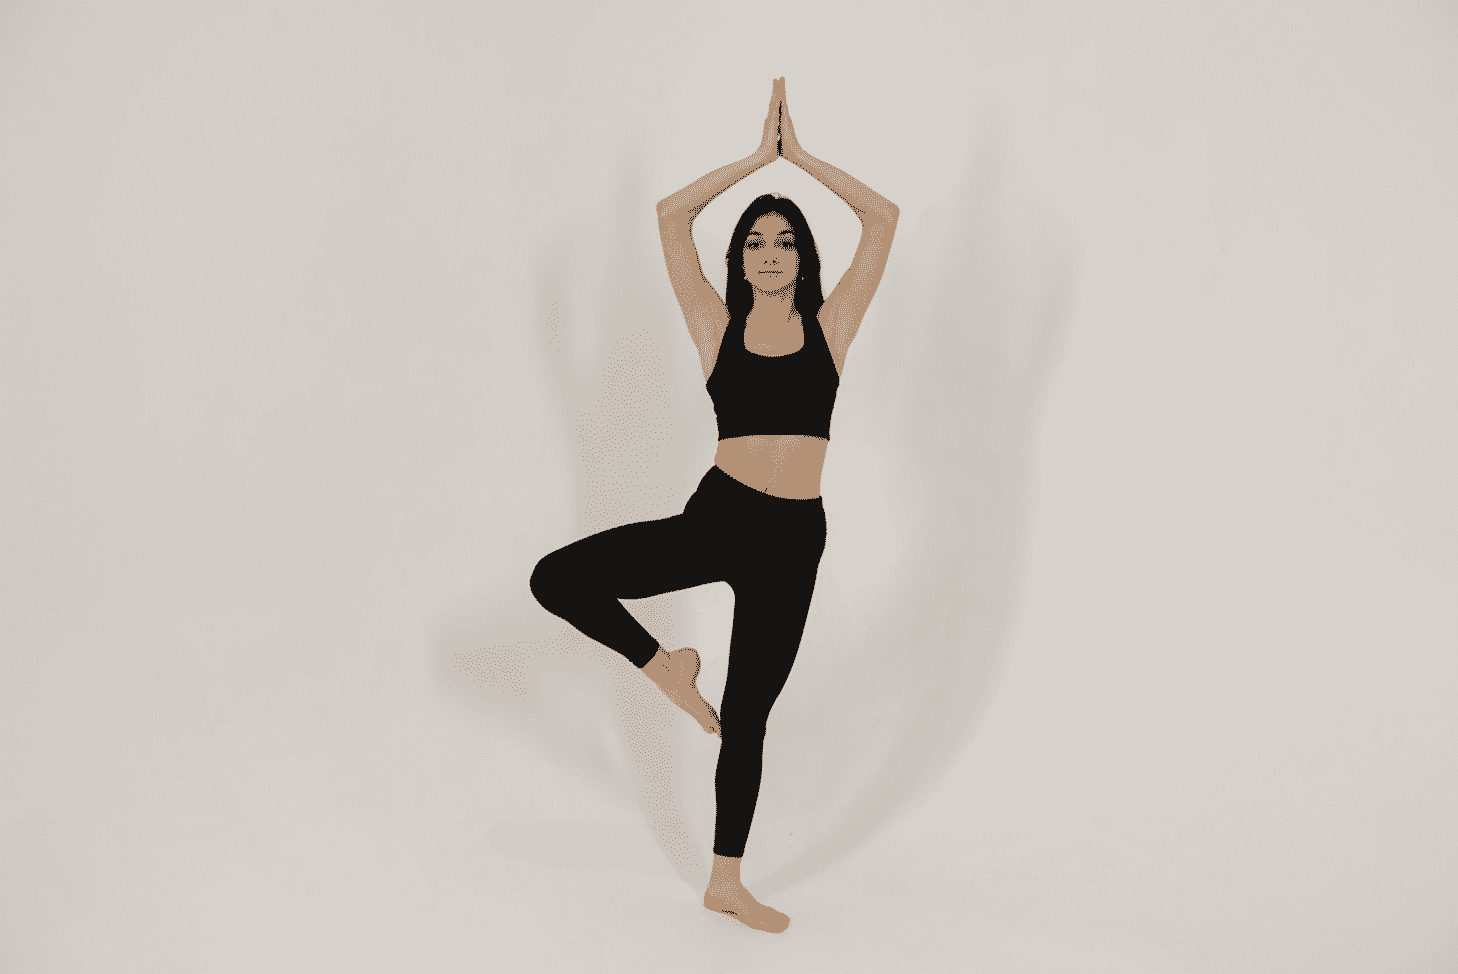 Tree Pose for To Find the Balance. Sports African Young Woman Standing in  the Yoga Pose Vrksasana with Closed Eyes in Stock Image - Image of  attractive, clothing: 175970205